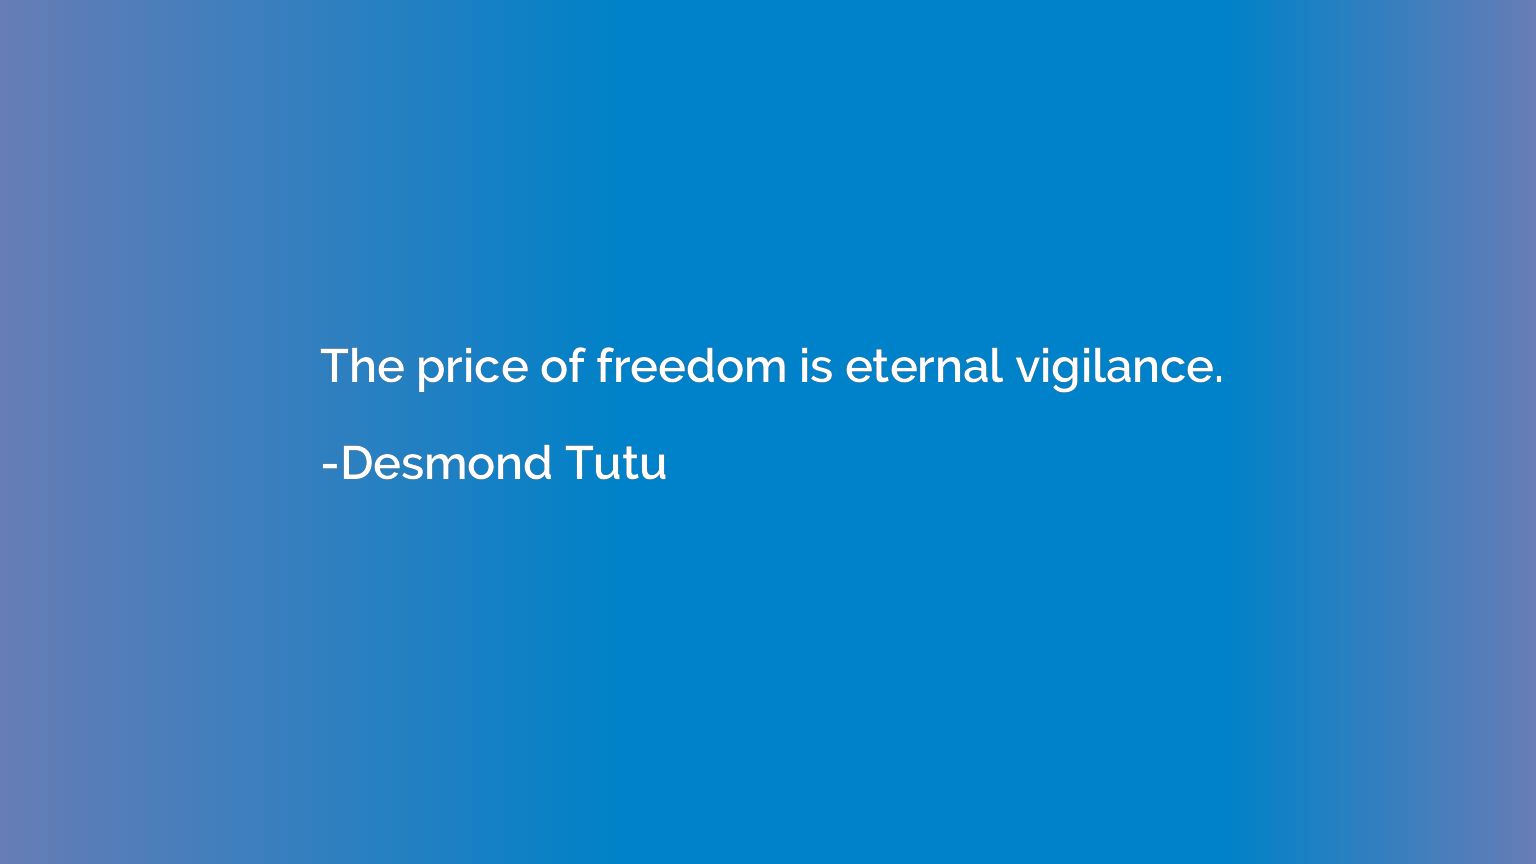 The price of freedom is eternal vigilance.